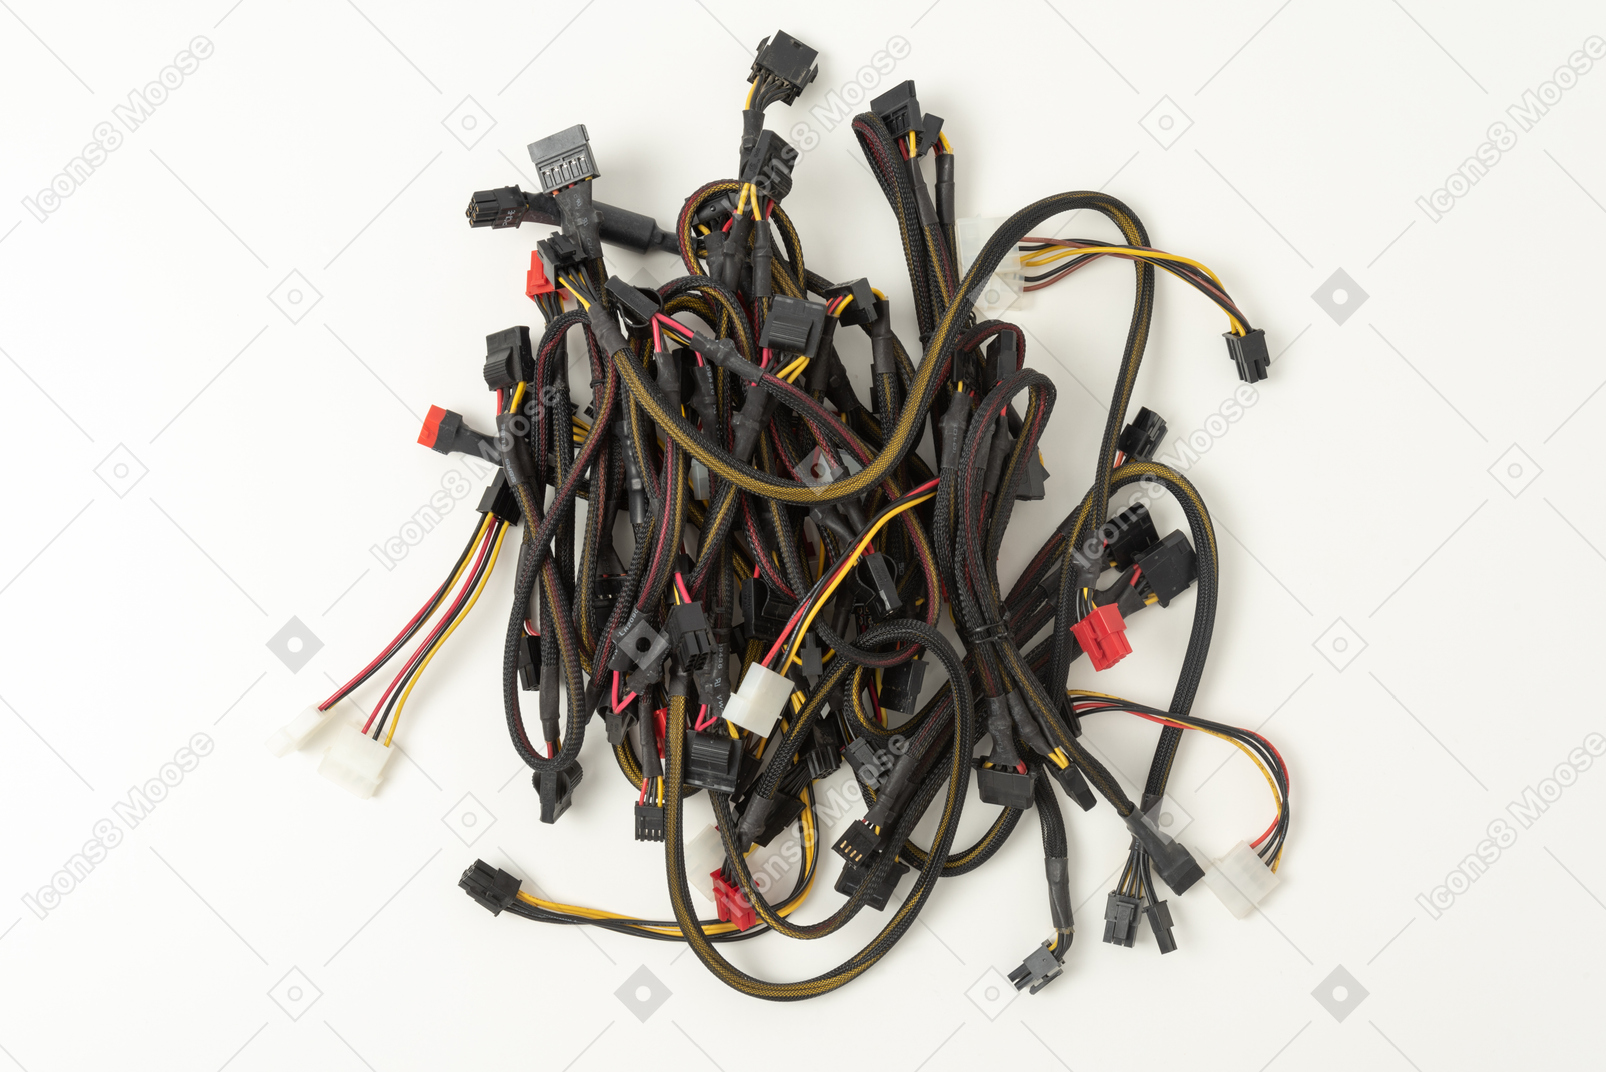 Bunch of wires on a white background